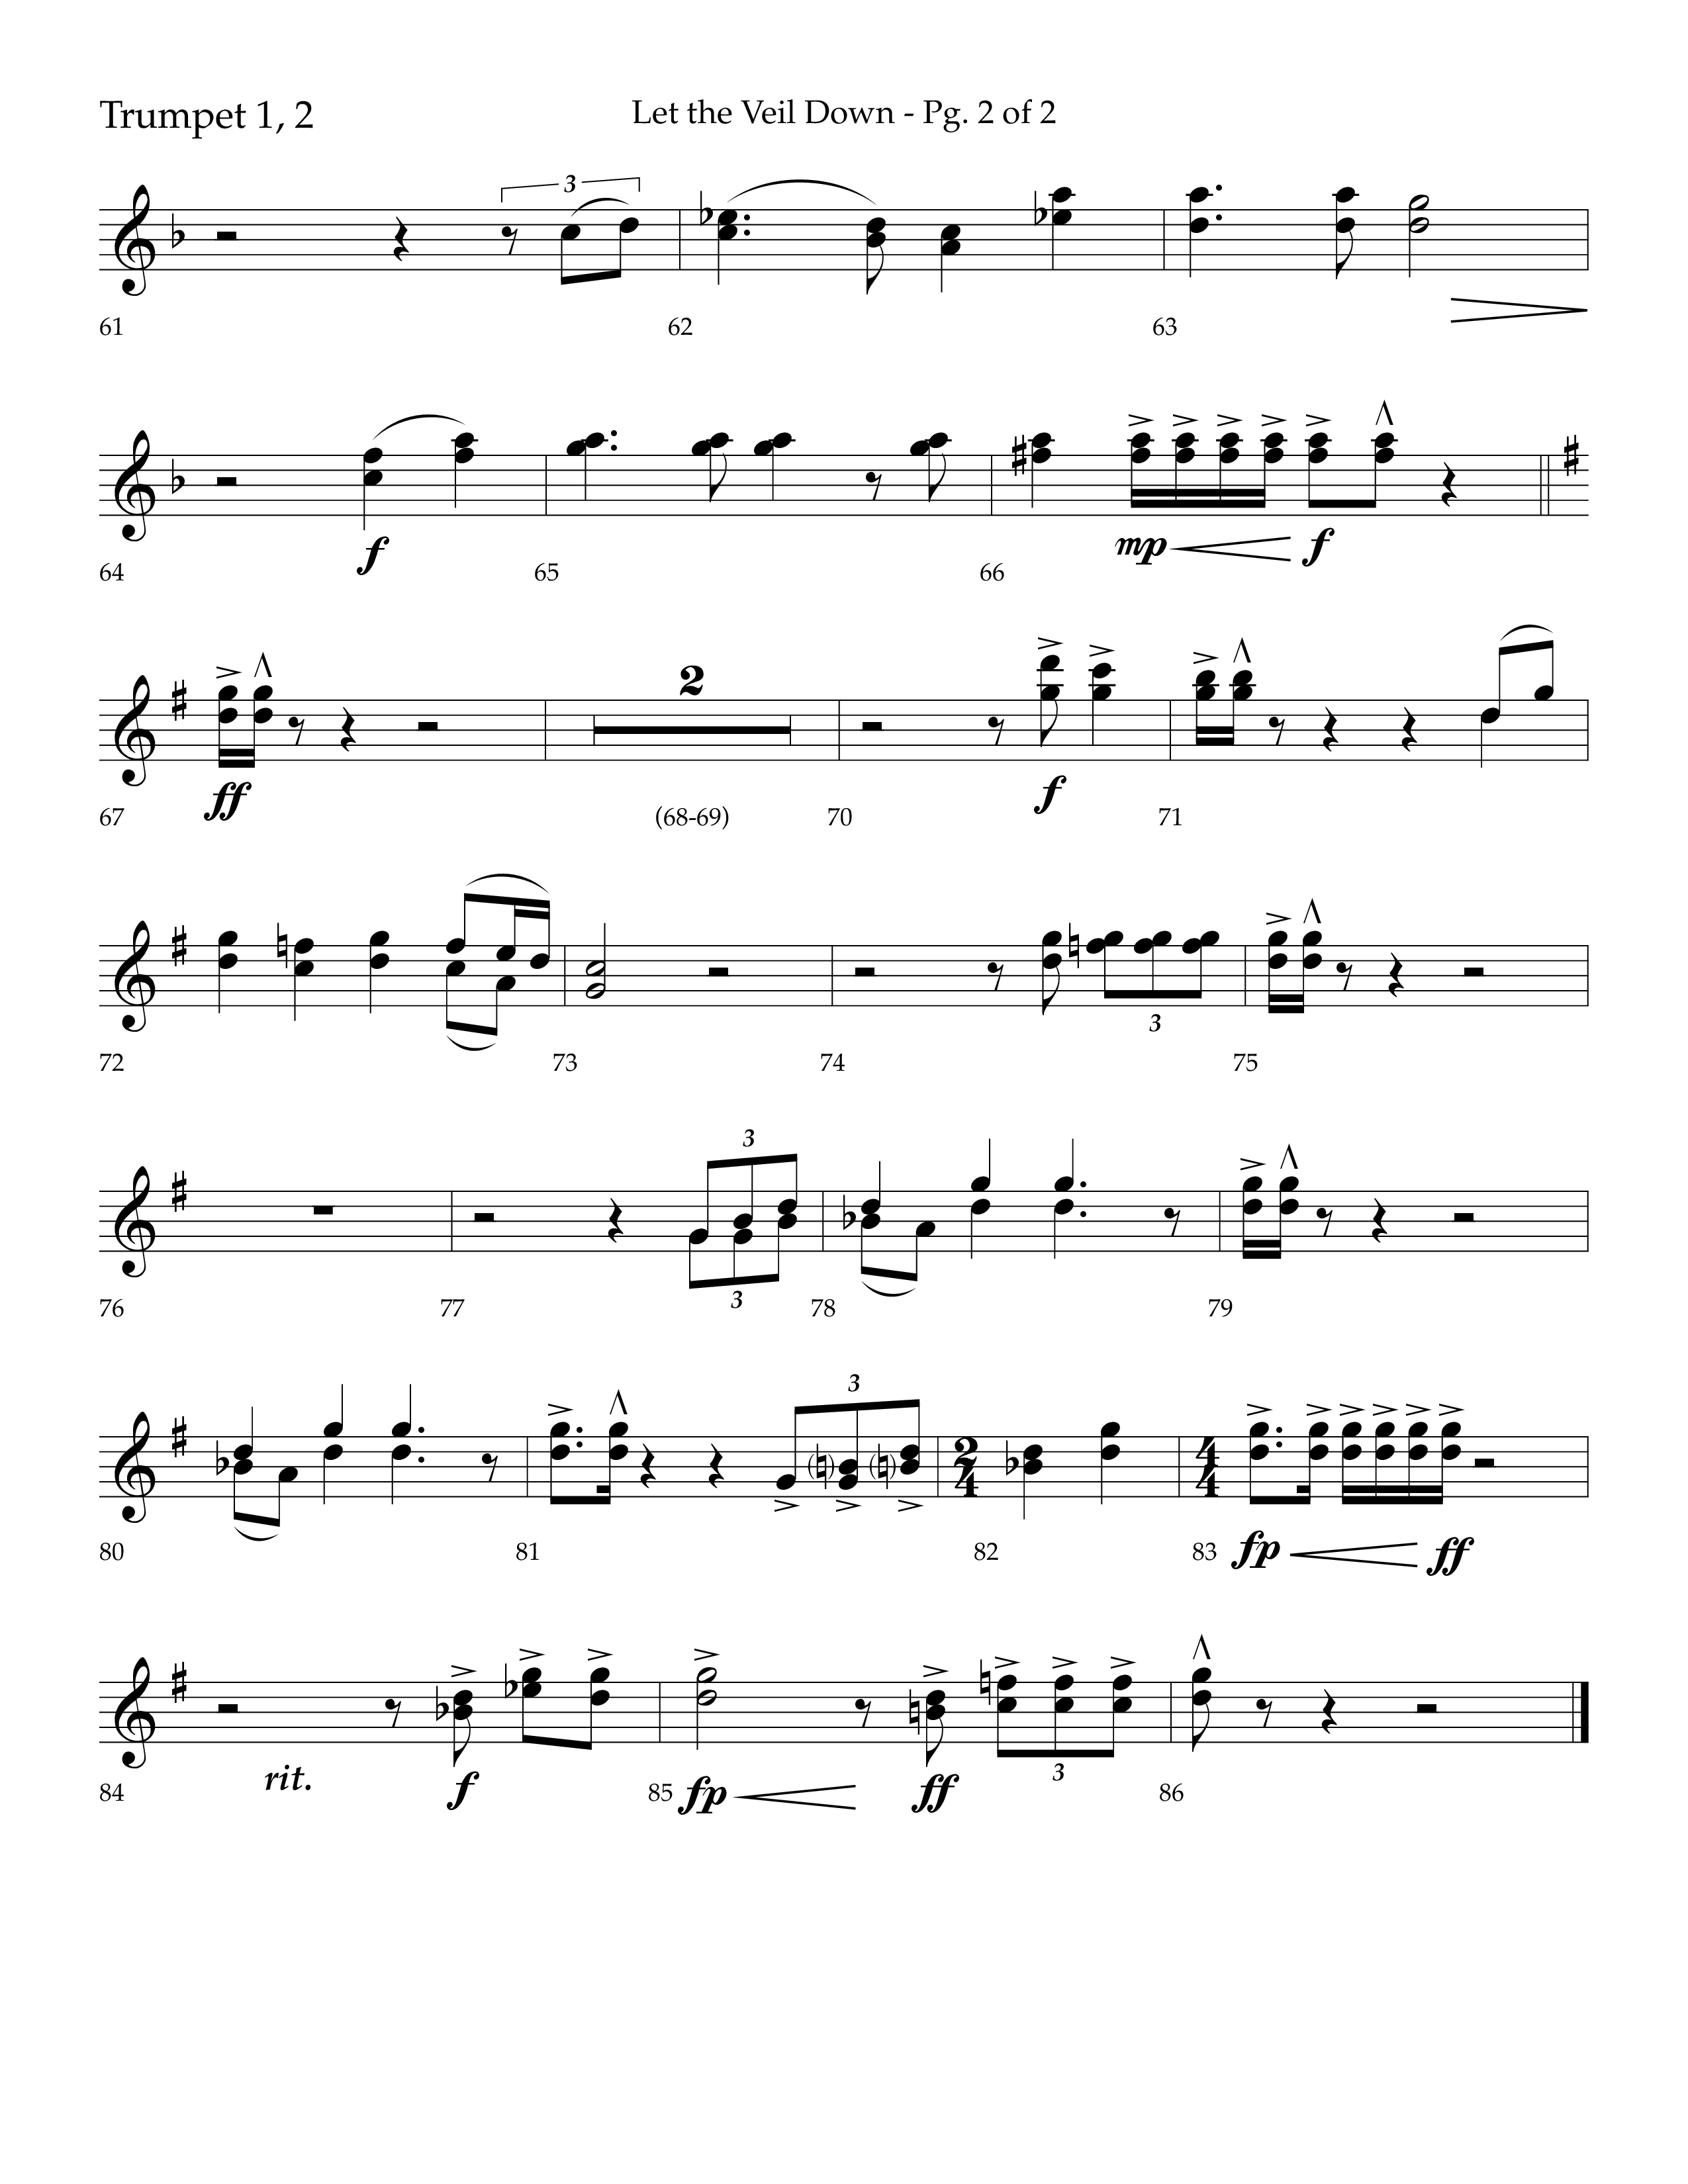 Let The Veil Down with I Exalt Thee (Choral Anthem SATB) Trumpet 1,2 (Lifeway Choral / Arr. Cody McVey)